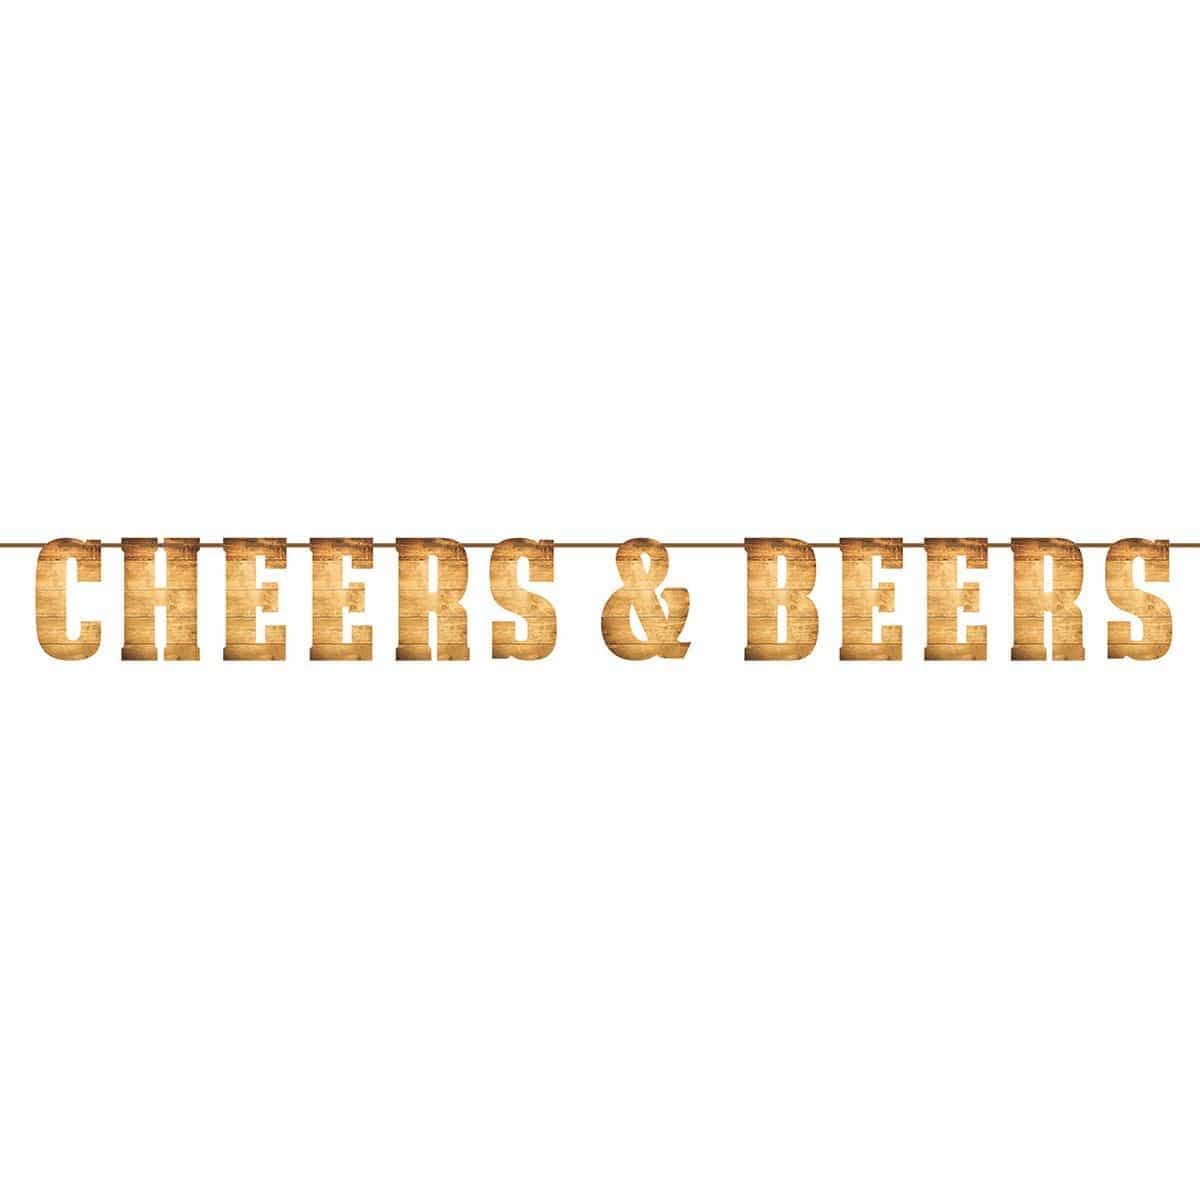 Buy Everyday Entertaining Cheers & Beers Banner sold at Party Expert